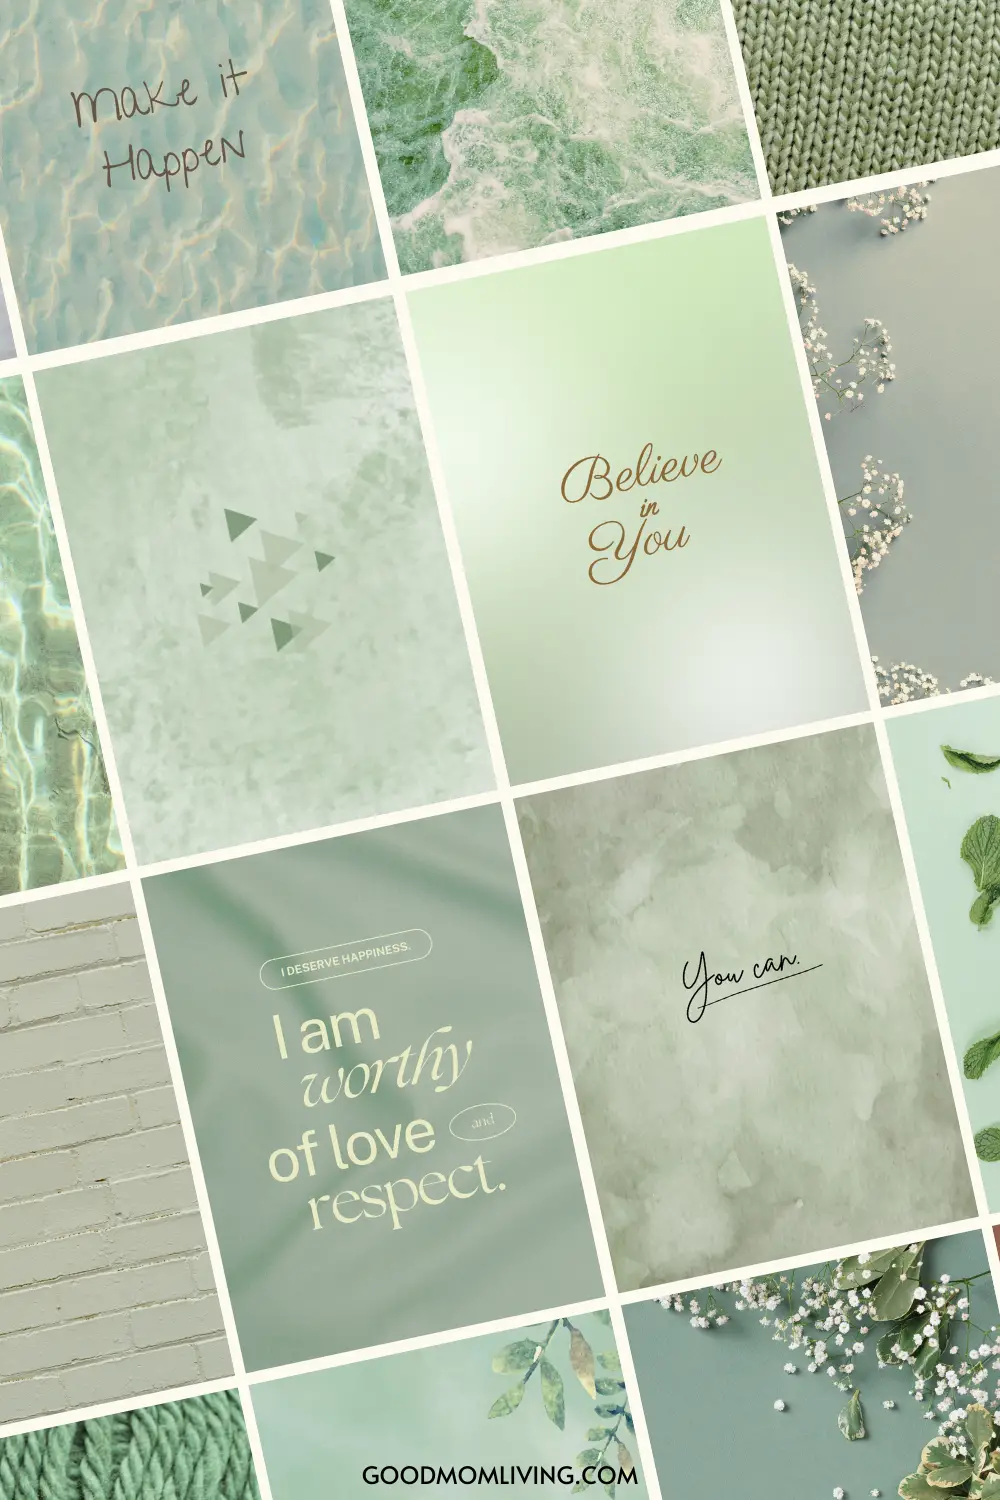 A collage of 9 photos in a seafoam green and white color scheme with affirmations such as 